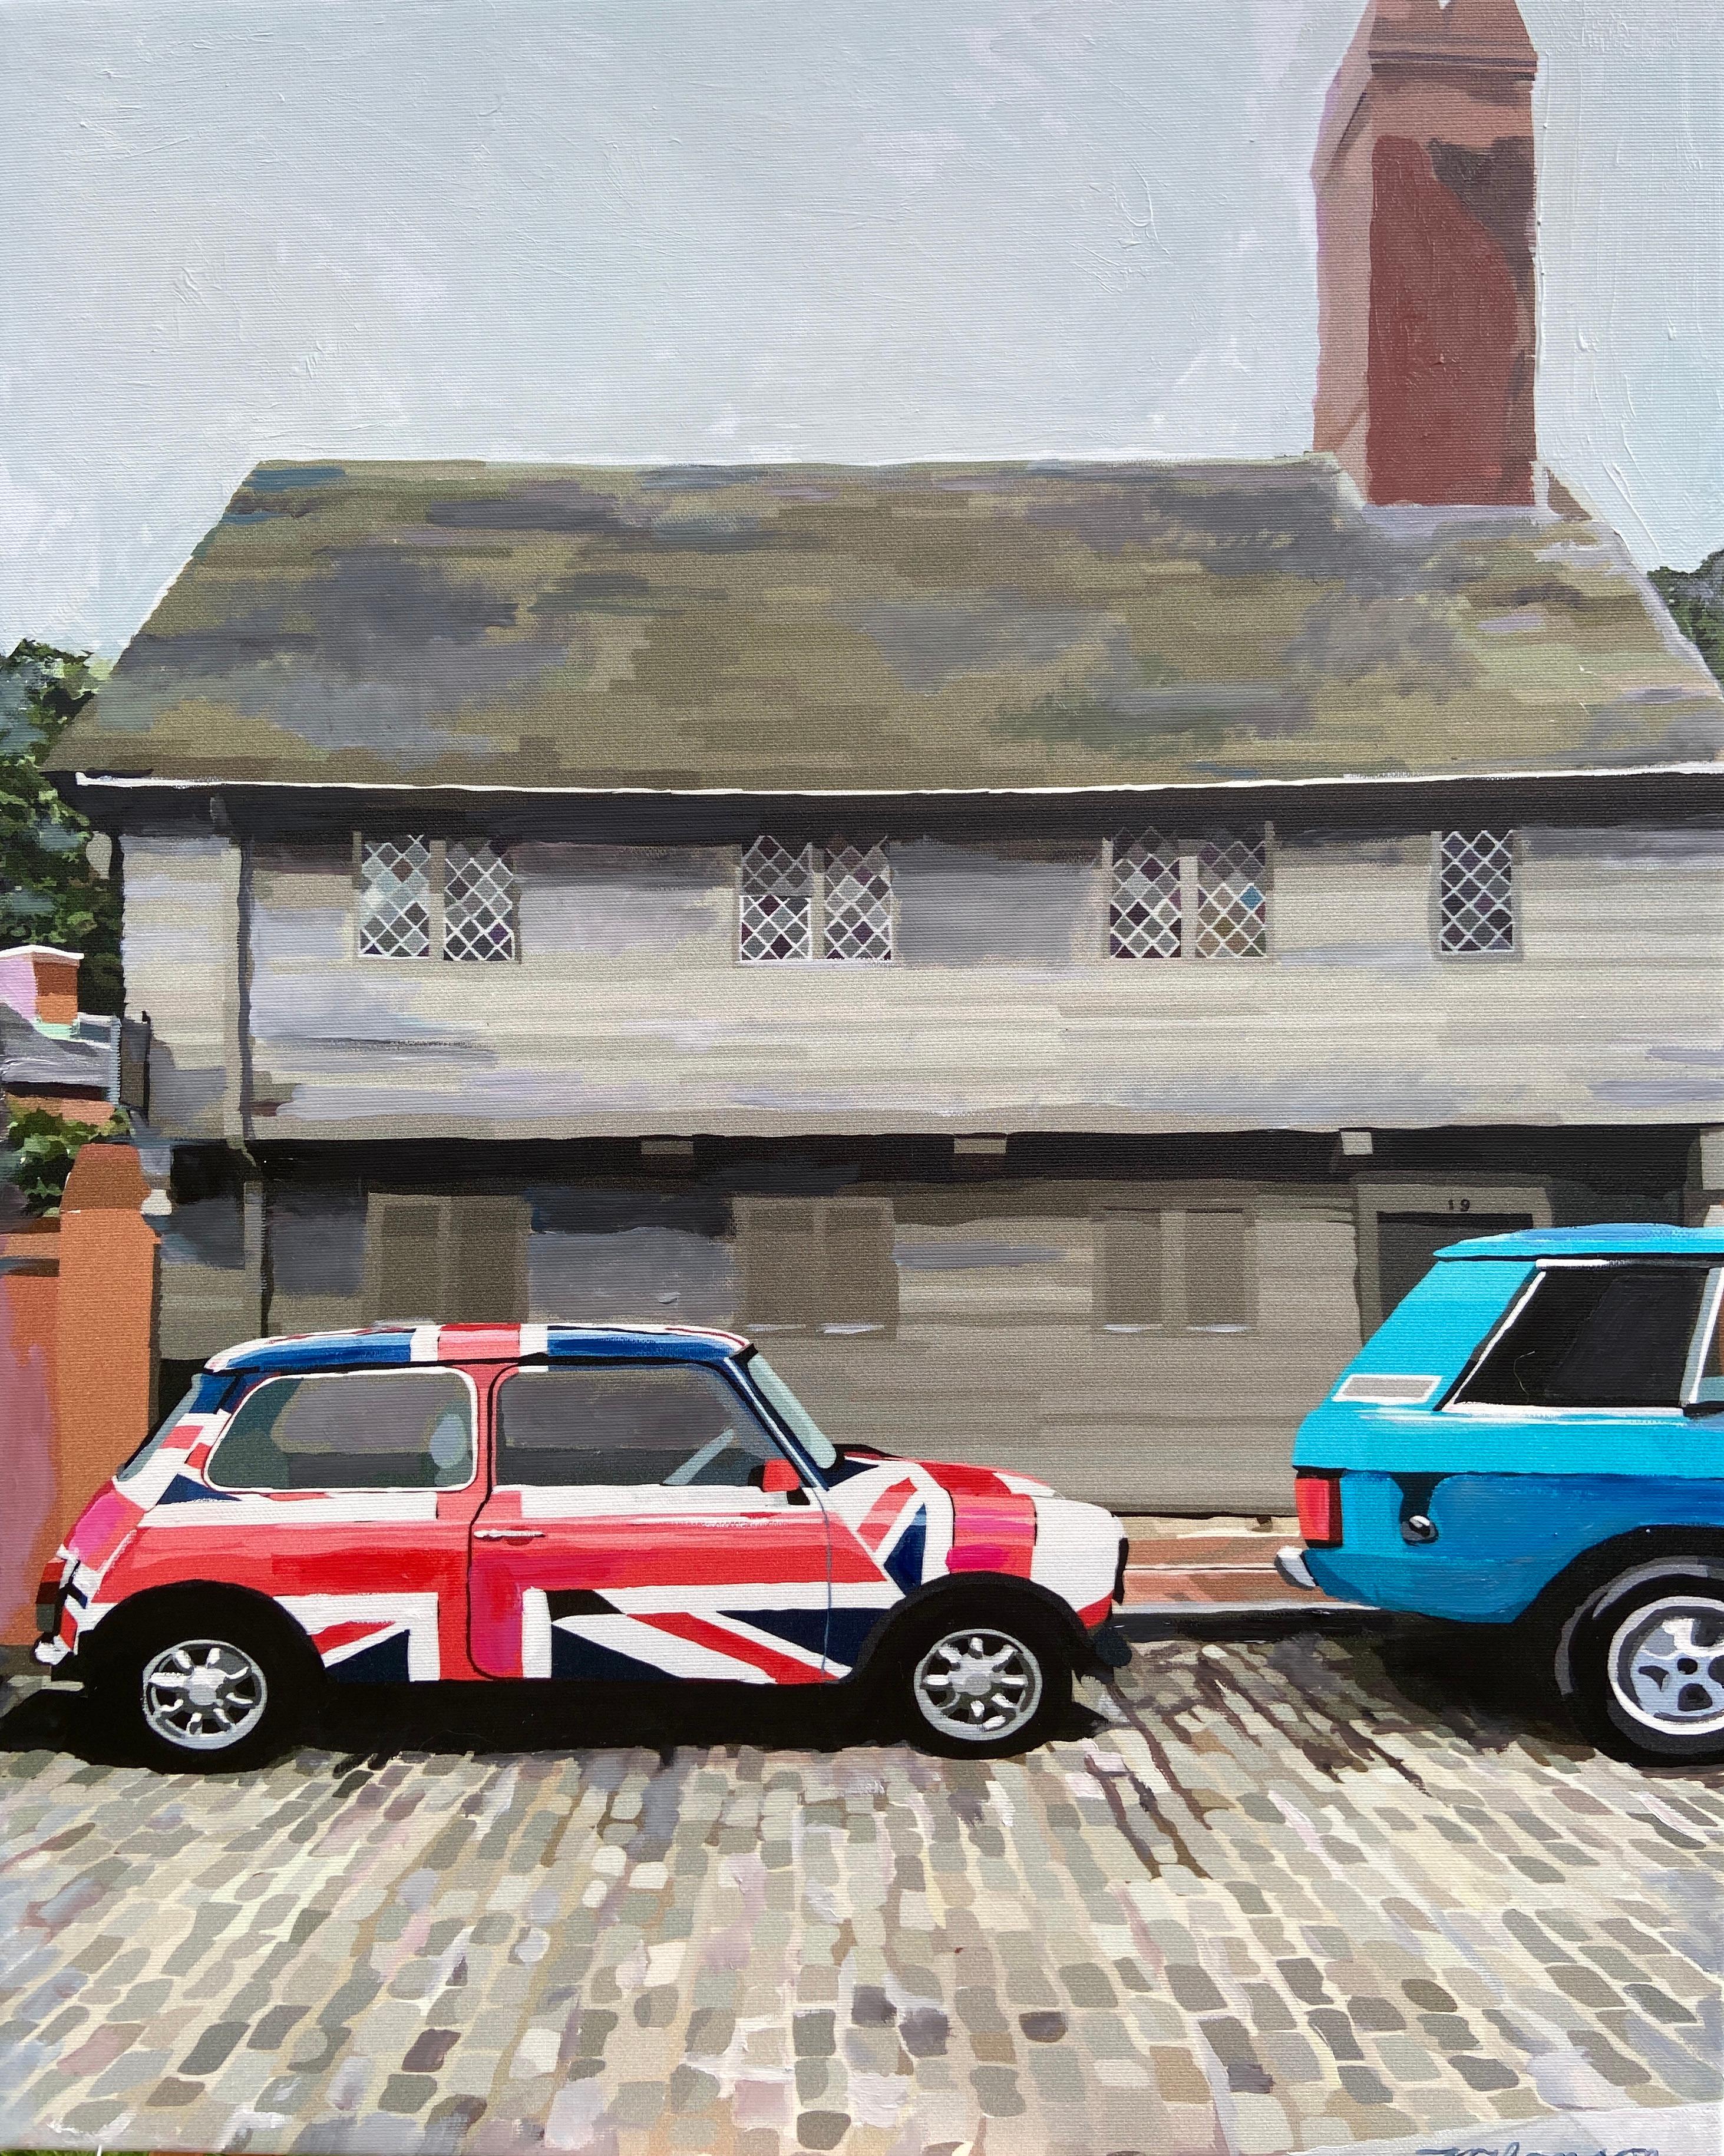 At Paul Revere's House, Original Painting - Mixed Media Art by Keith Thomson